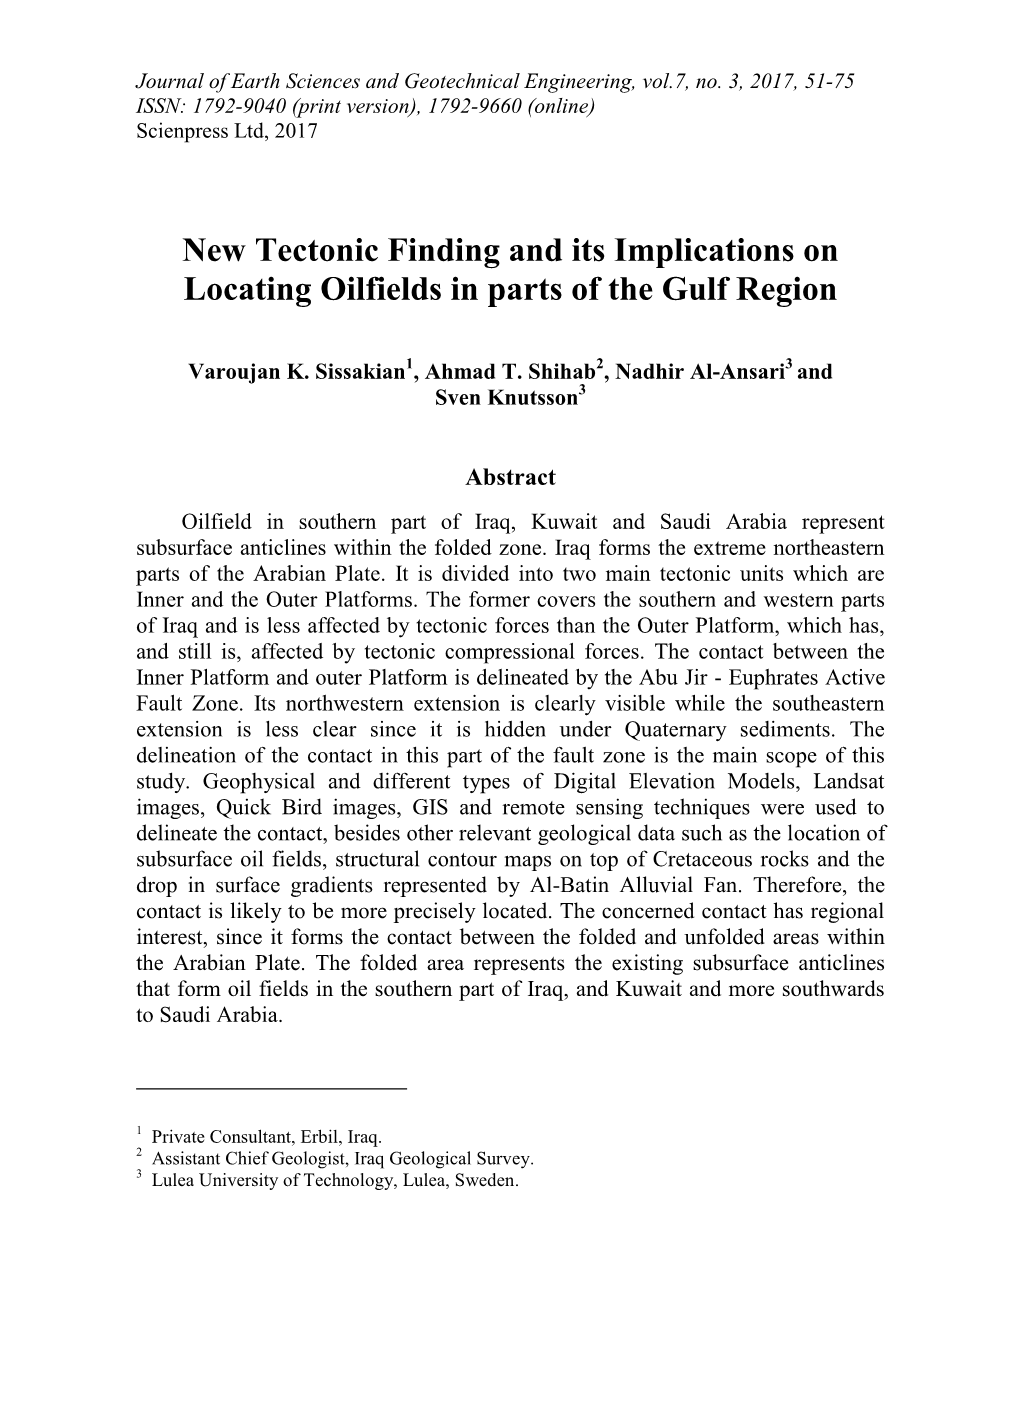 New Tectonic Finding and Its Implications on Locating Oilfields in Parts of the Gulf Region